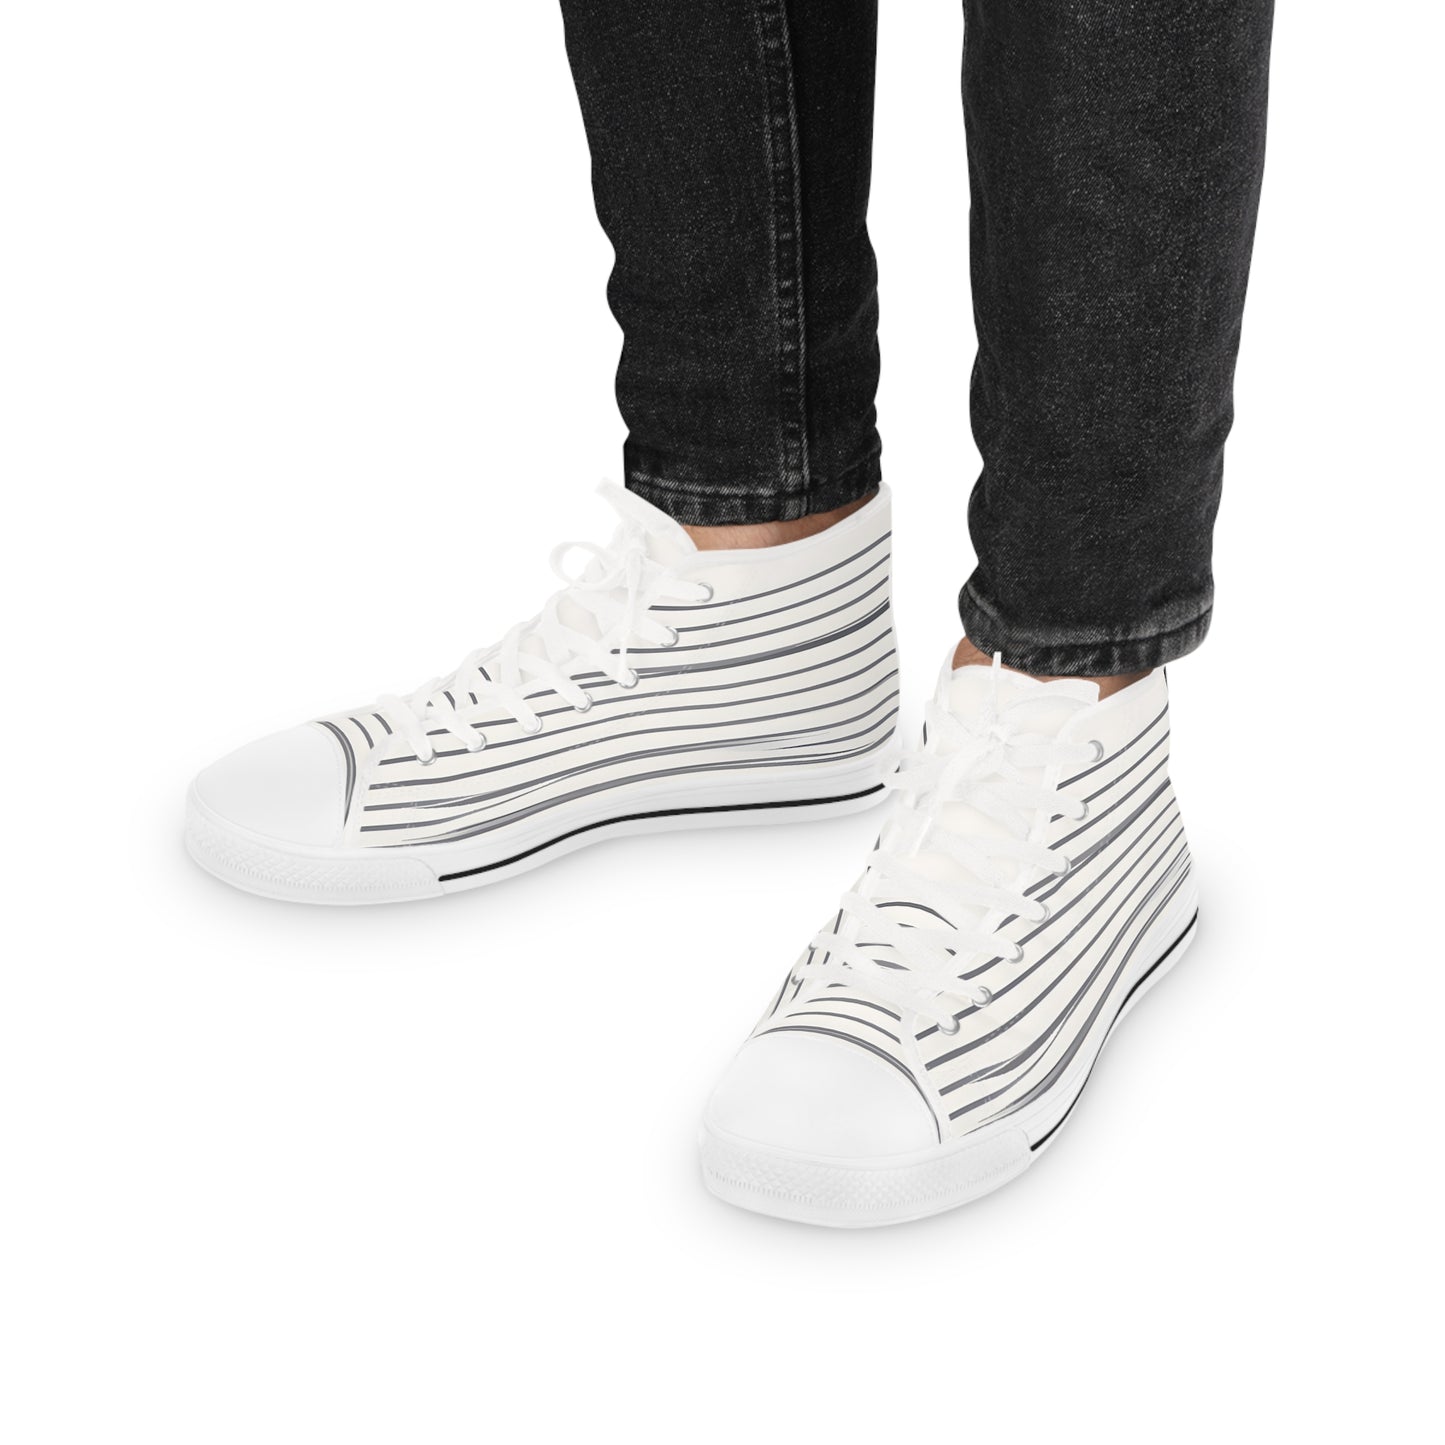 Lino Winifred - Men's High-Top Sneakers